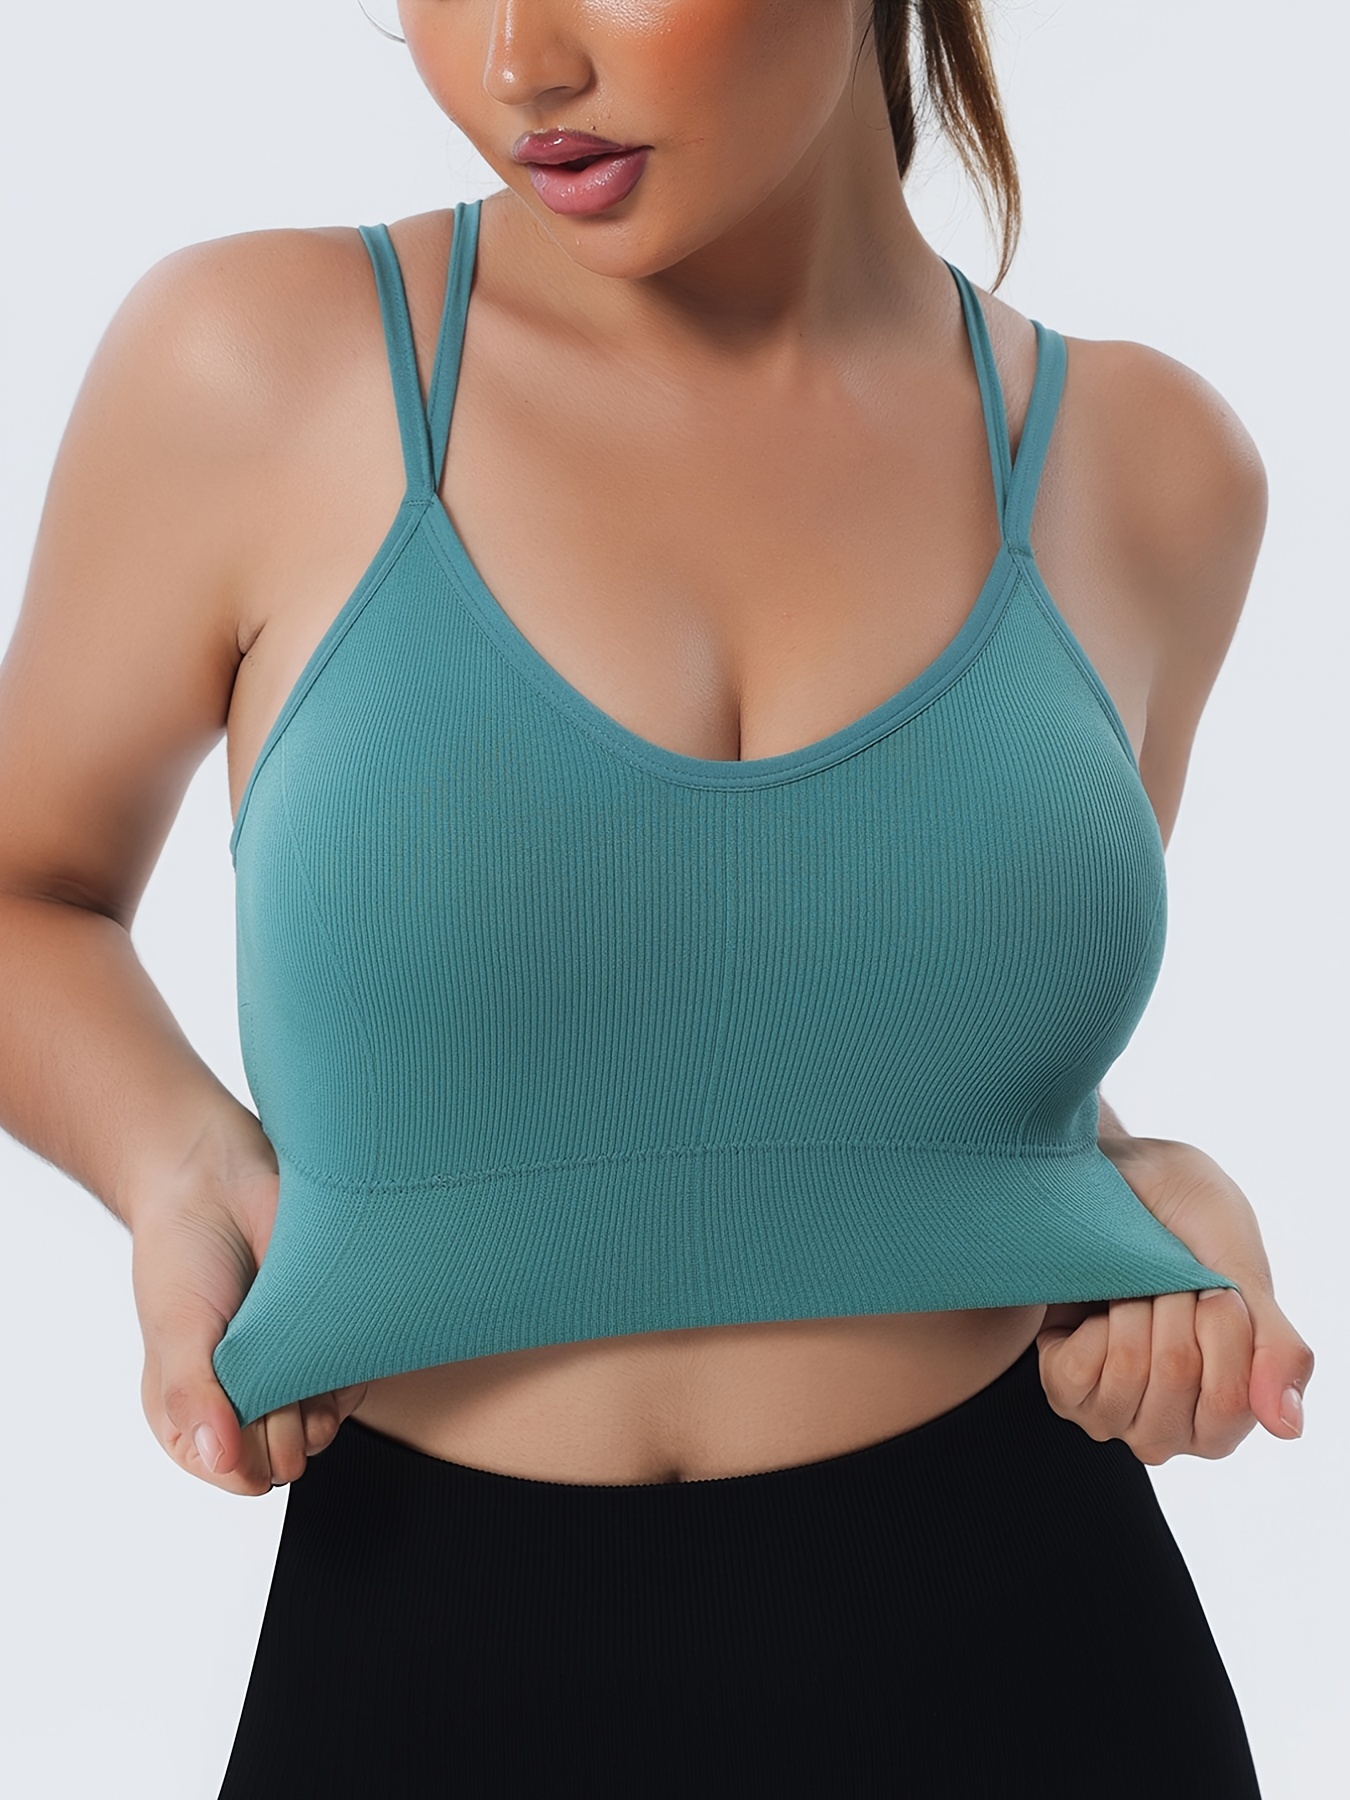 Lemedy Sports Bra Adjustable Strap Crop Padded Tank Top Workout Yoga Gym  Running (S, Dark Teal) at  Women's Clothing store